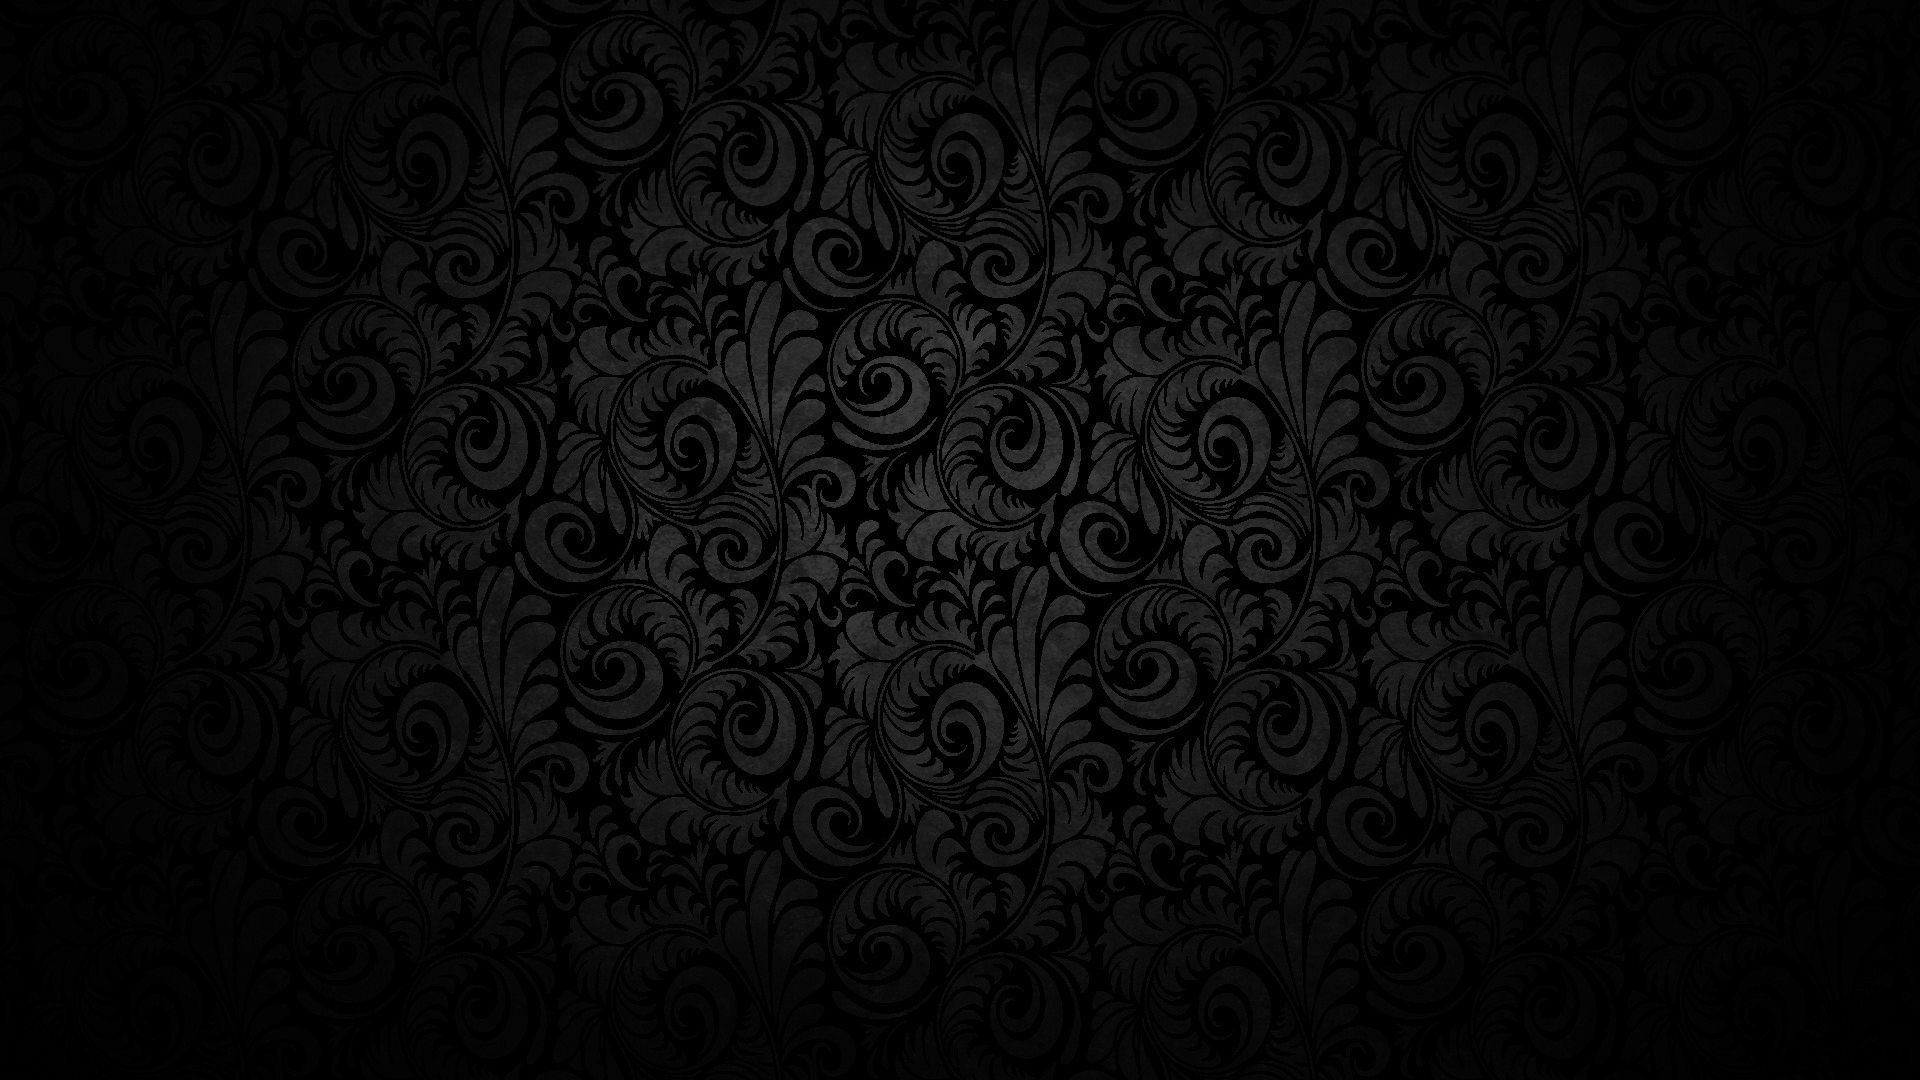 1920x1080 1080p-Wallpapers-of-Abstract-Black-Swirl-Wallpaper-Background -